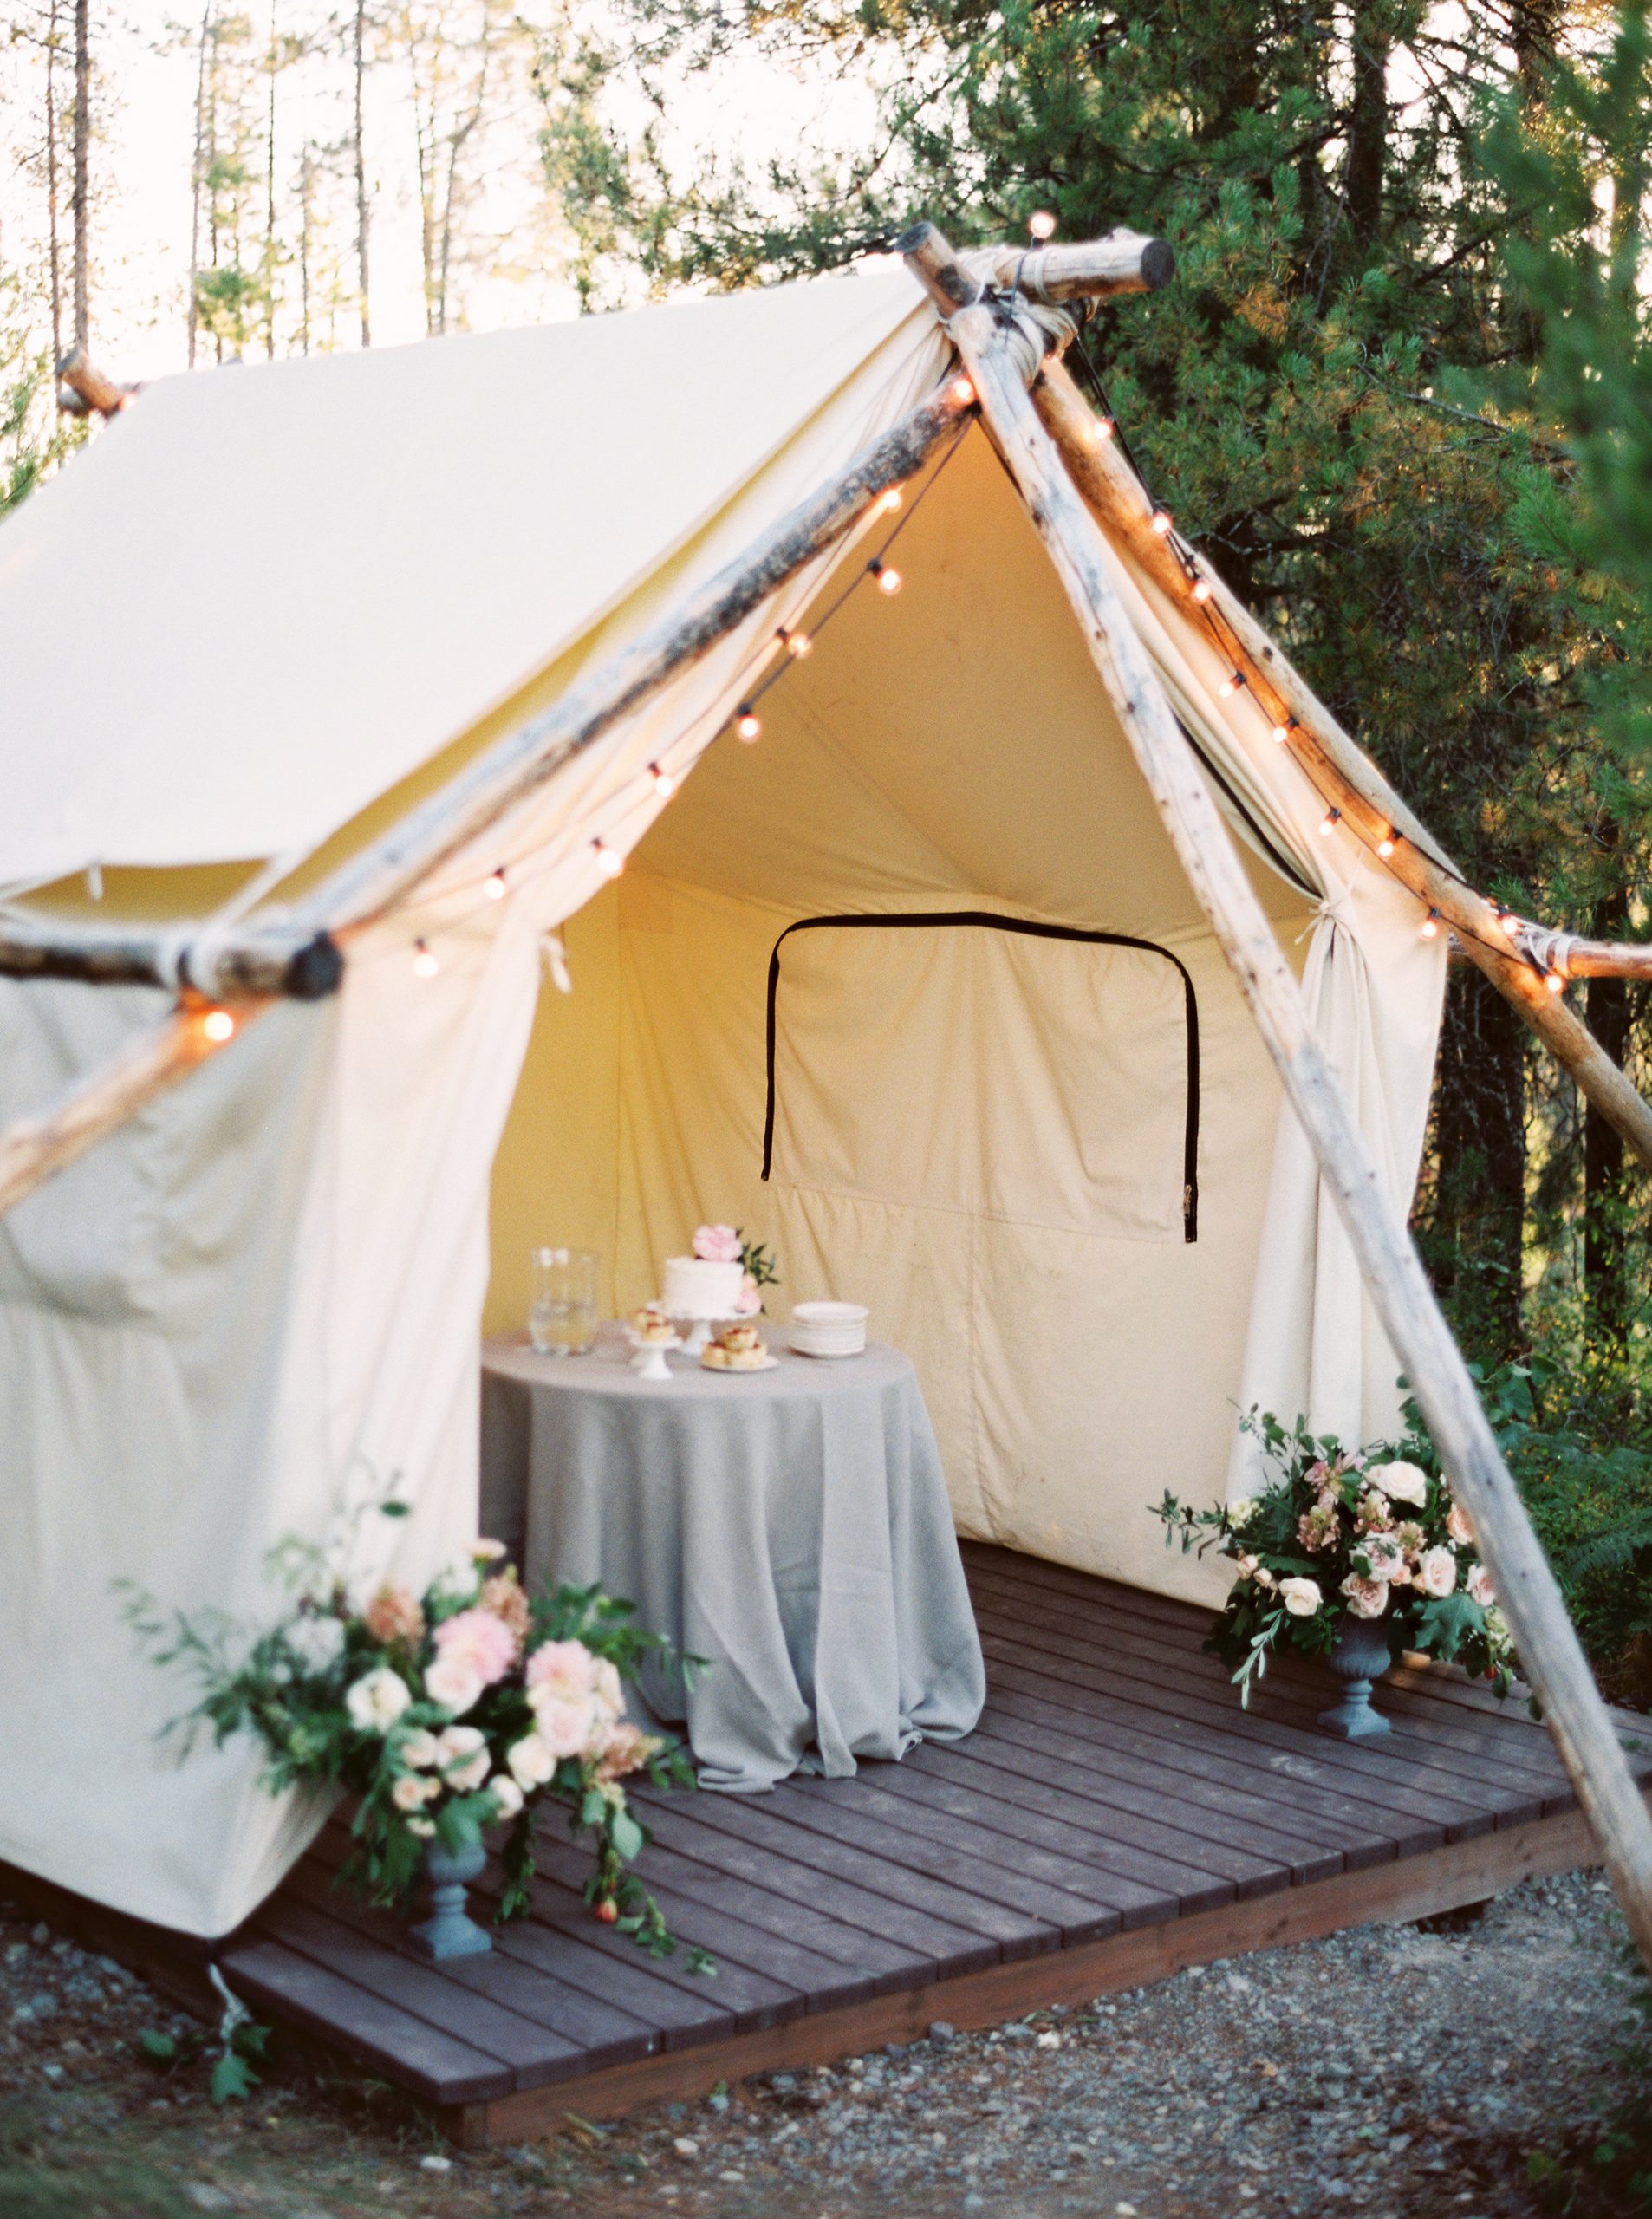 28 Tent Decorating Ideas That Will Upgrade Your Wedding Reception ...